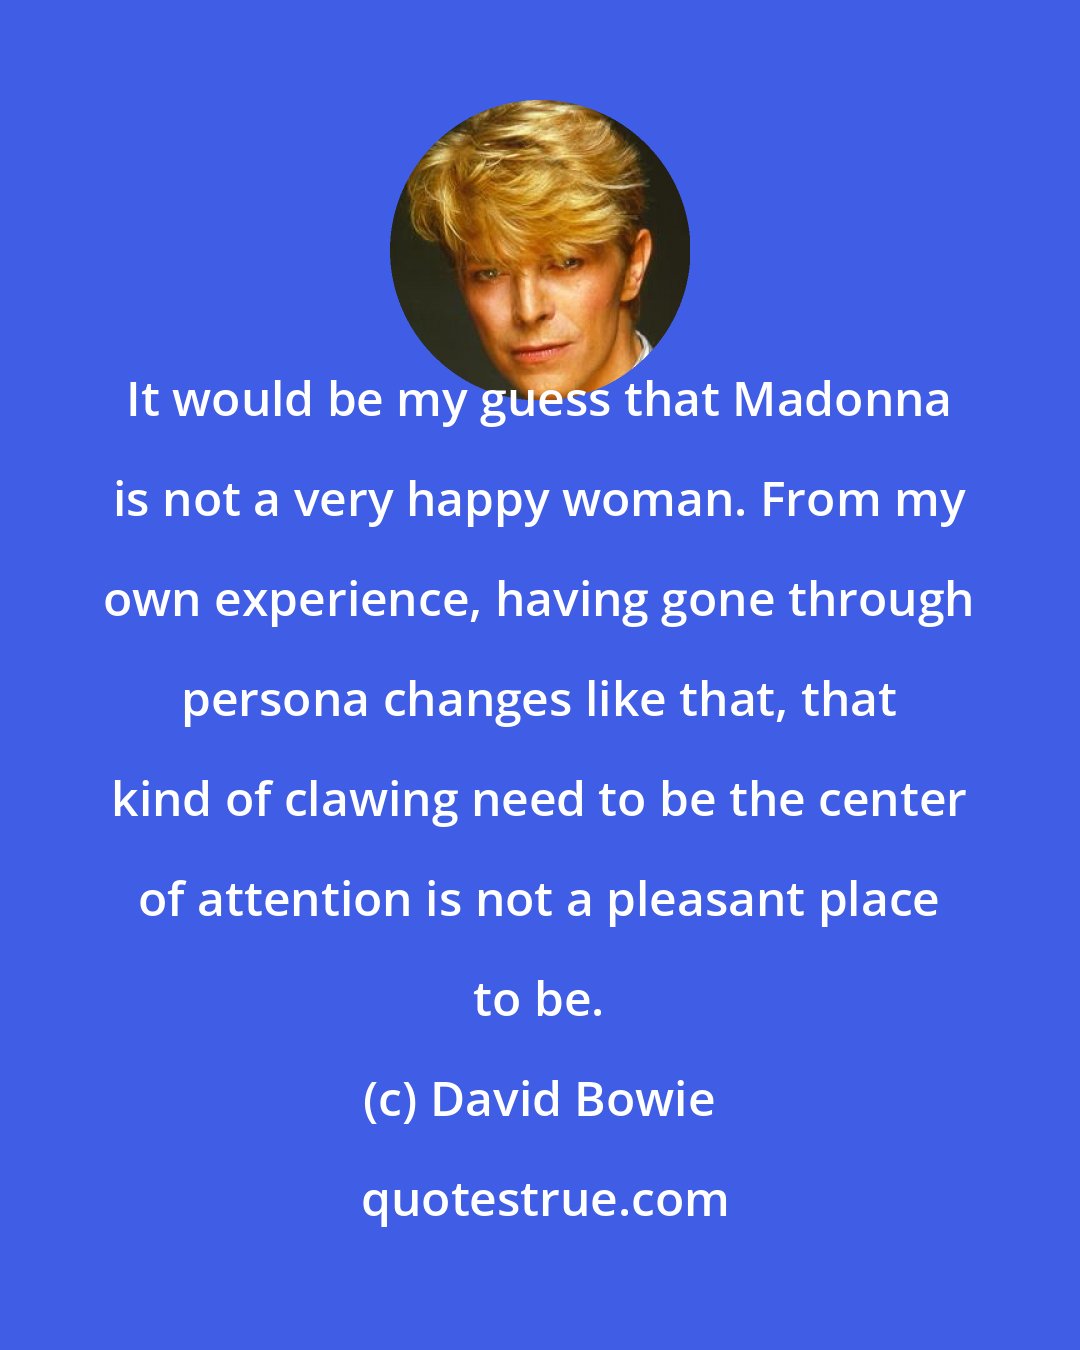 David Bowie: It would be my guess that Madonna is not a very happy woman. From my own experience, having gone through persona changes like that, that kind of clawing need to be the center of attention is not a pleasant place to be.